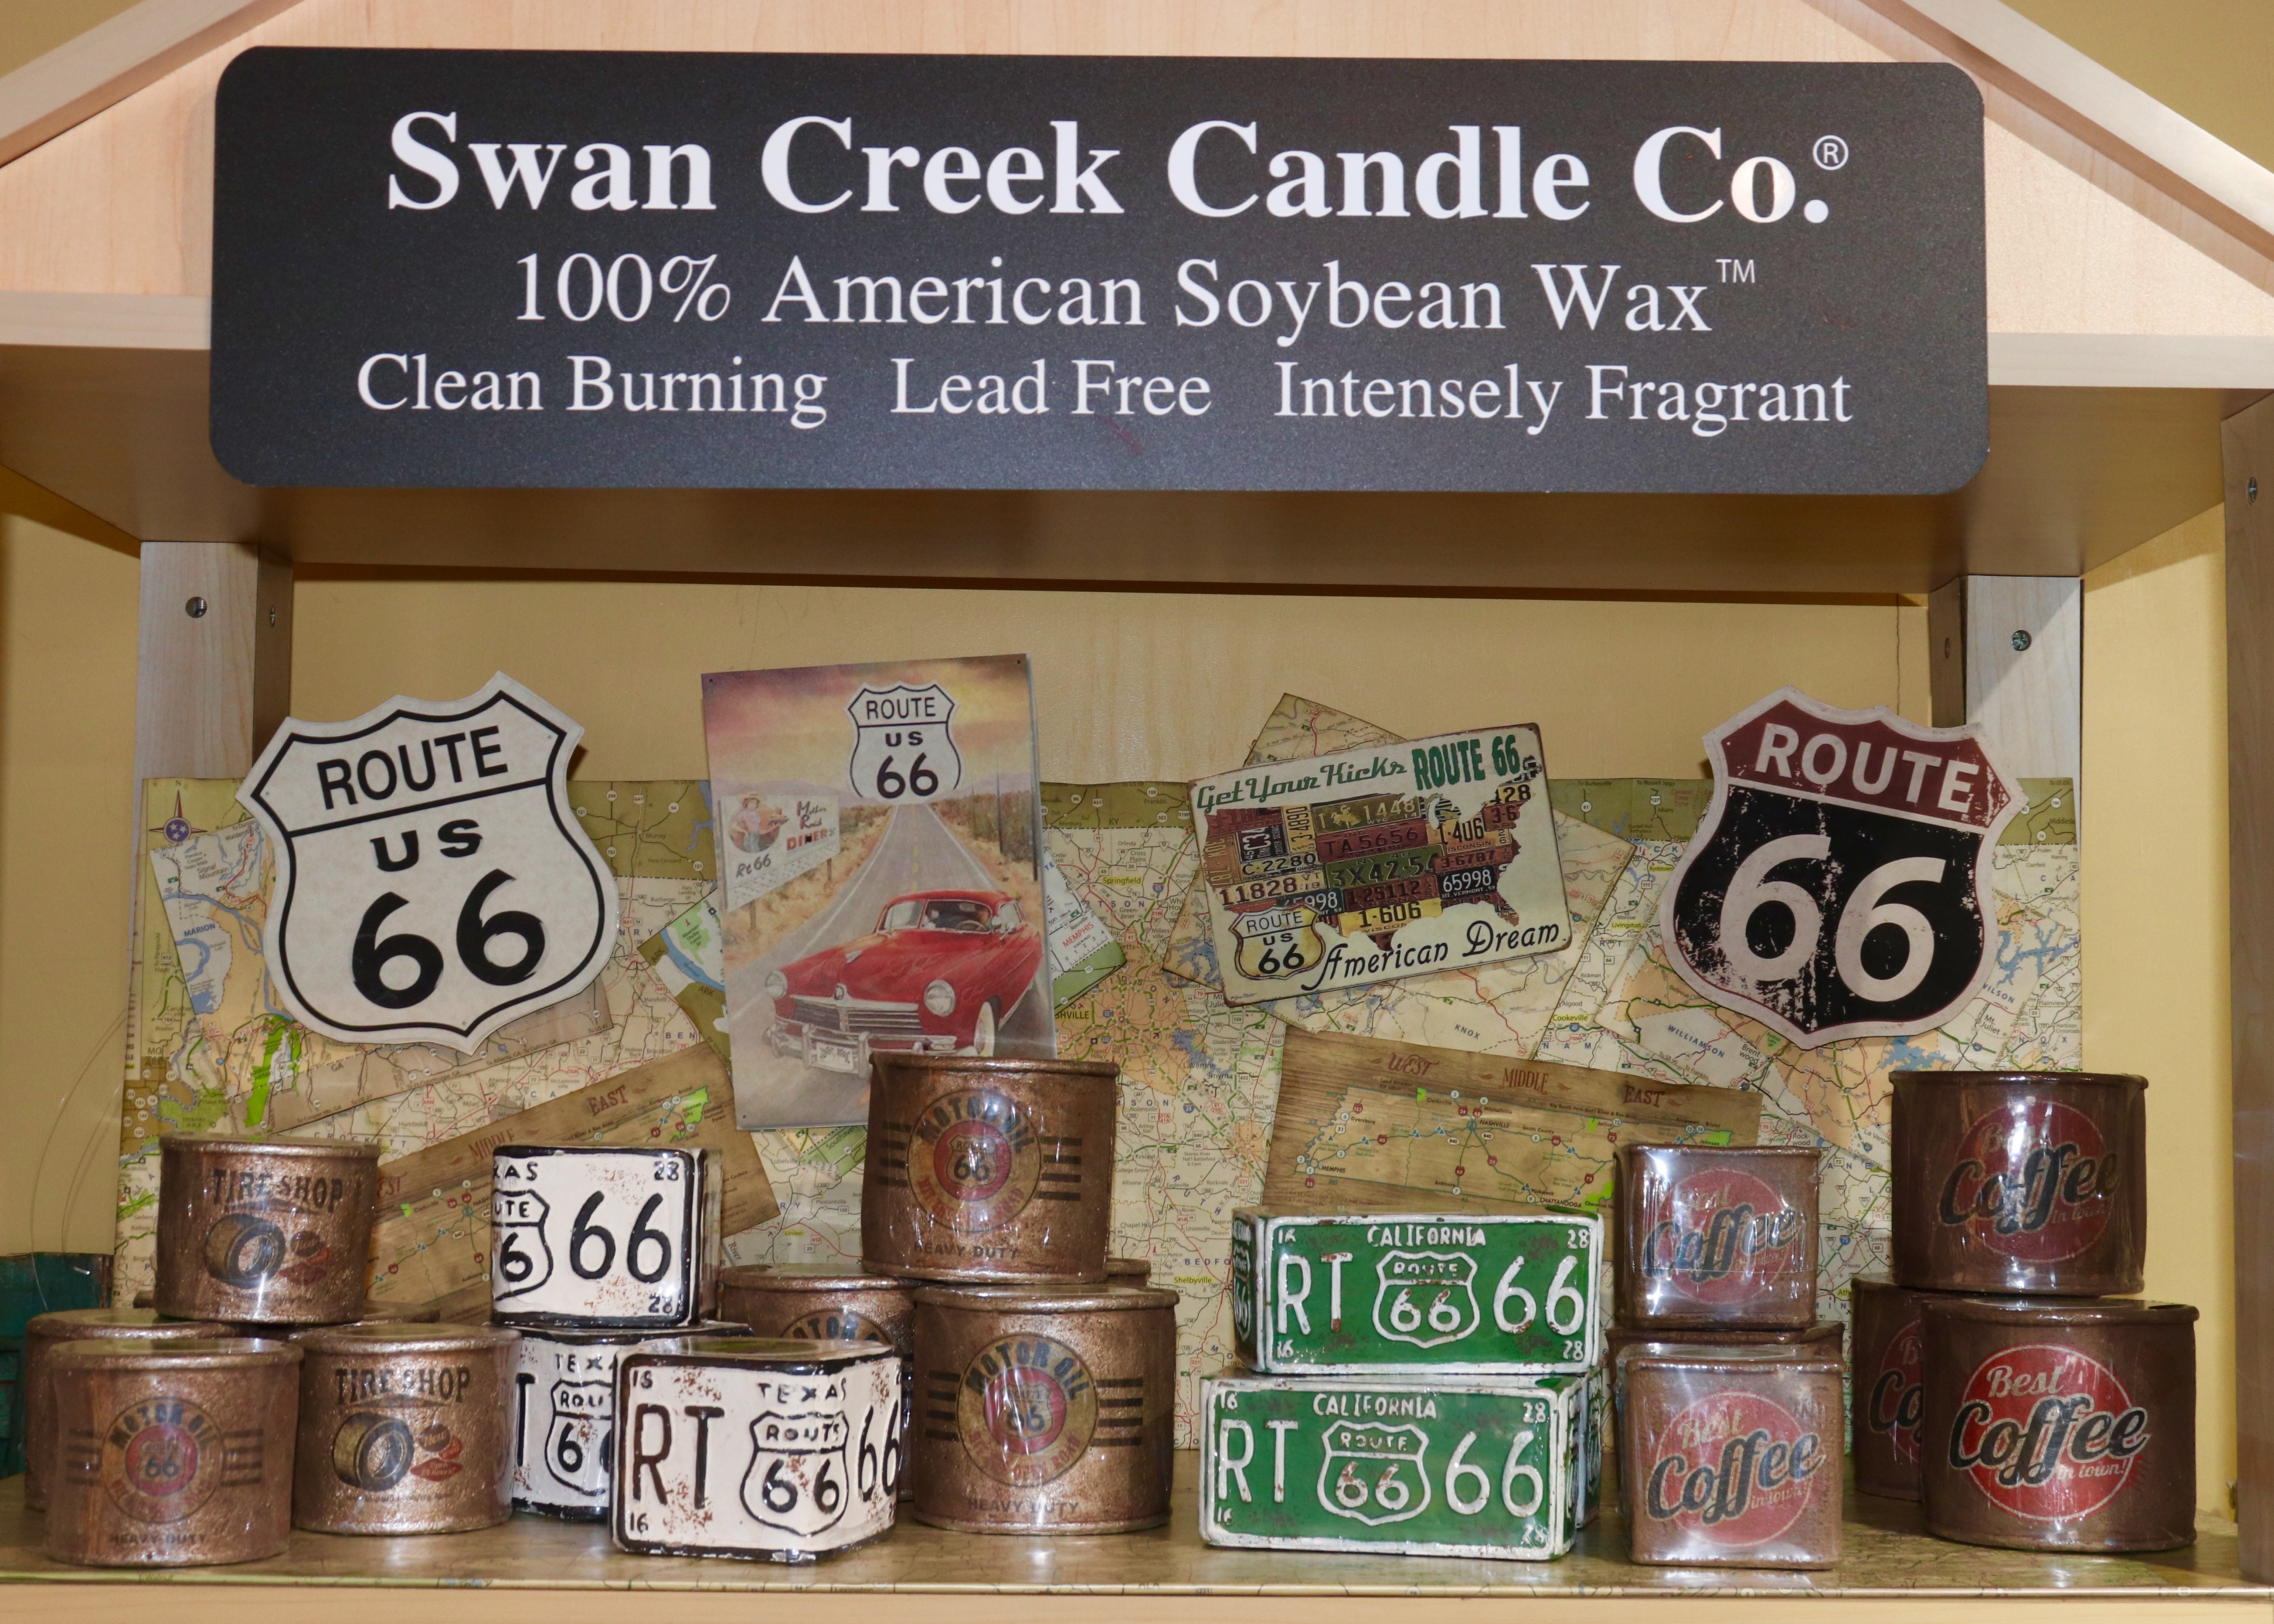 We have candles from Swan Creek Candle Co.! Sunshine Flowers & Gifts Lebanon (615)444-4038